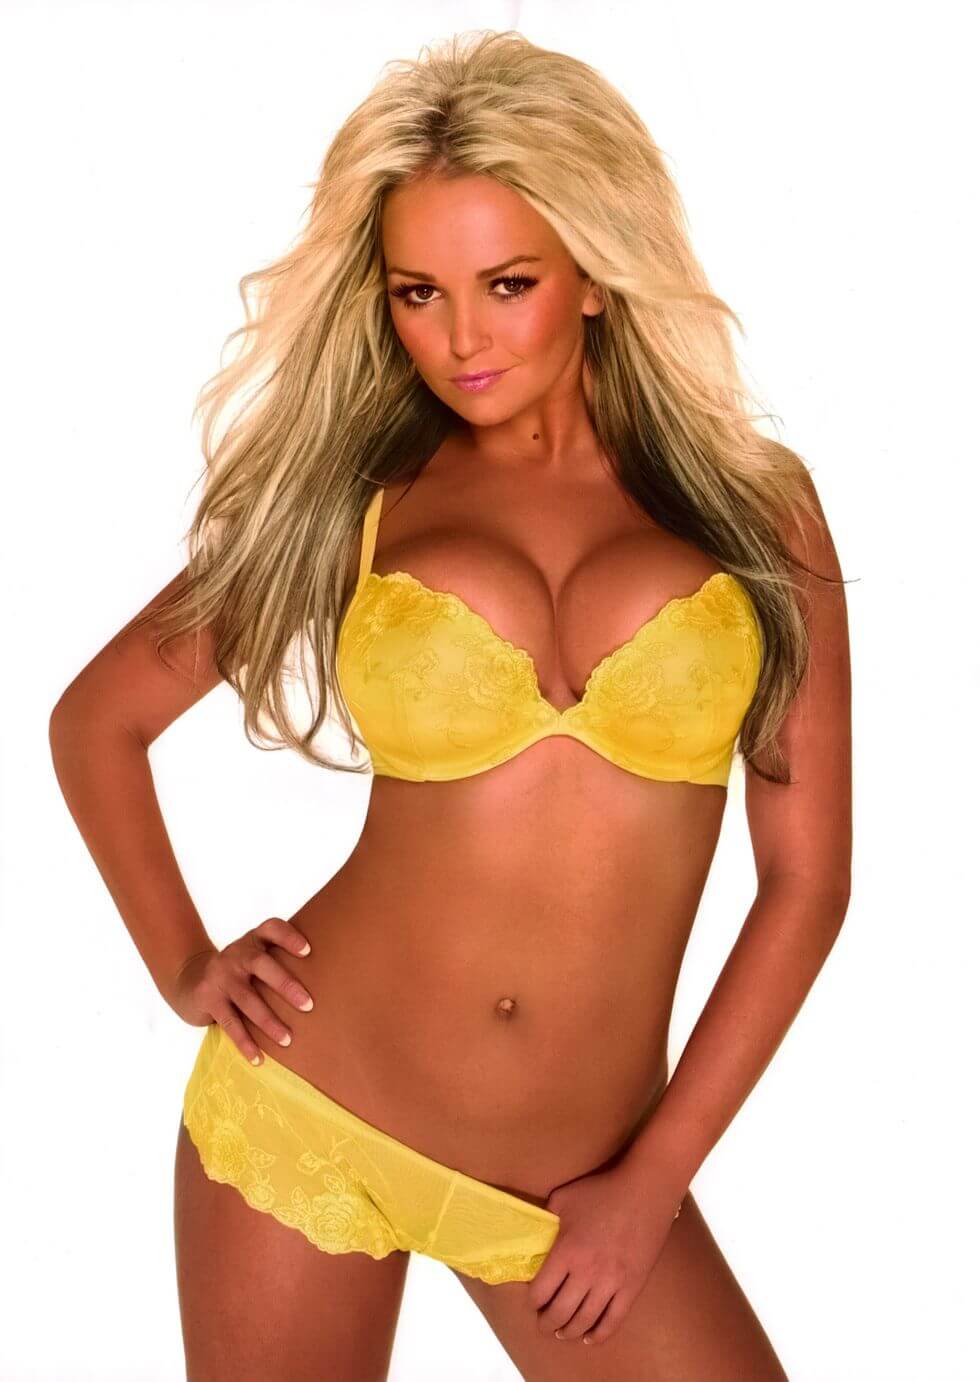 49 Hot Pictures Of Jennifer Ellison Will Make You Lose Your Mind | Best Of Comic Books